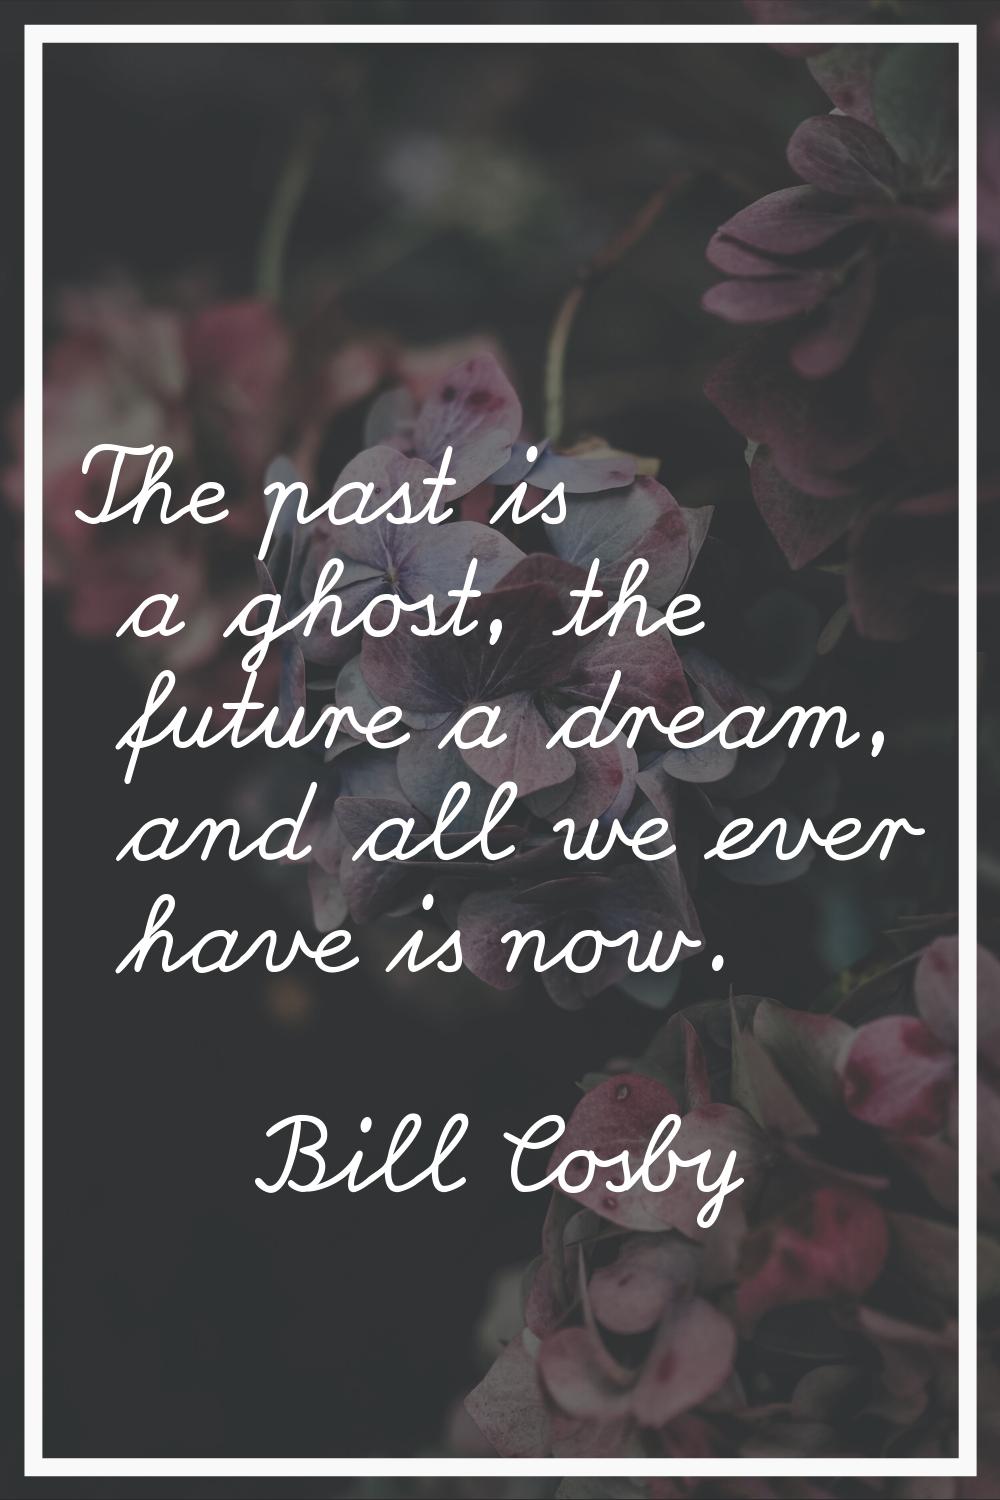 The past is a ghost, the future a dream, and all we ever have is now.